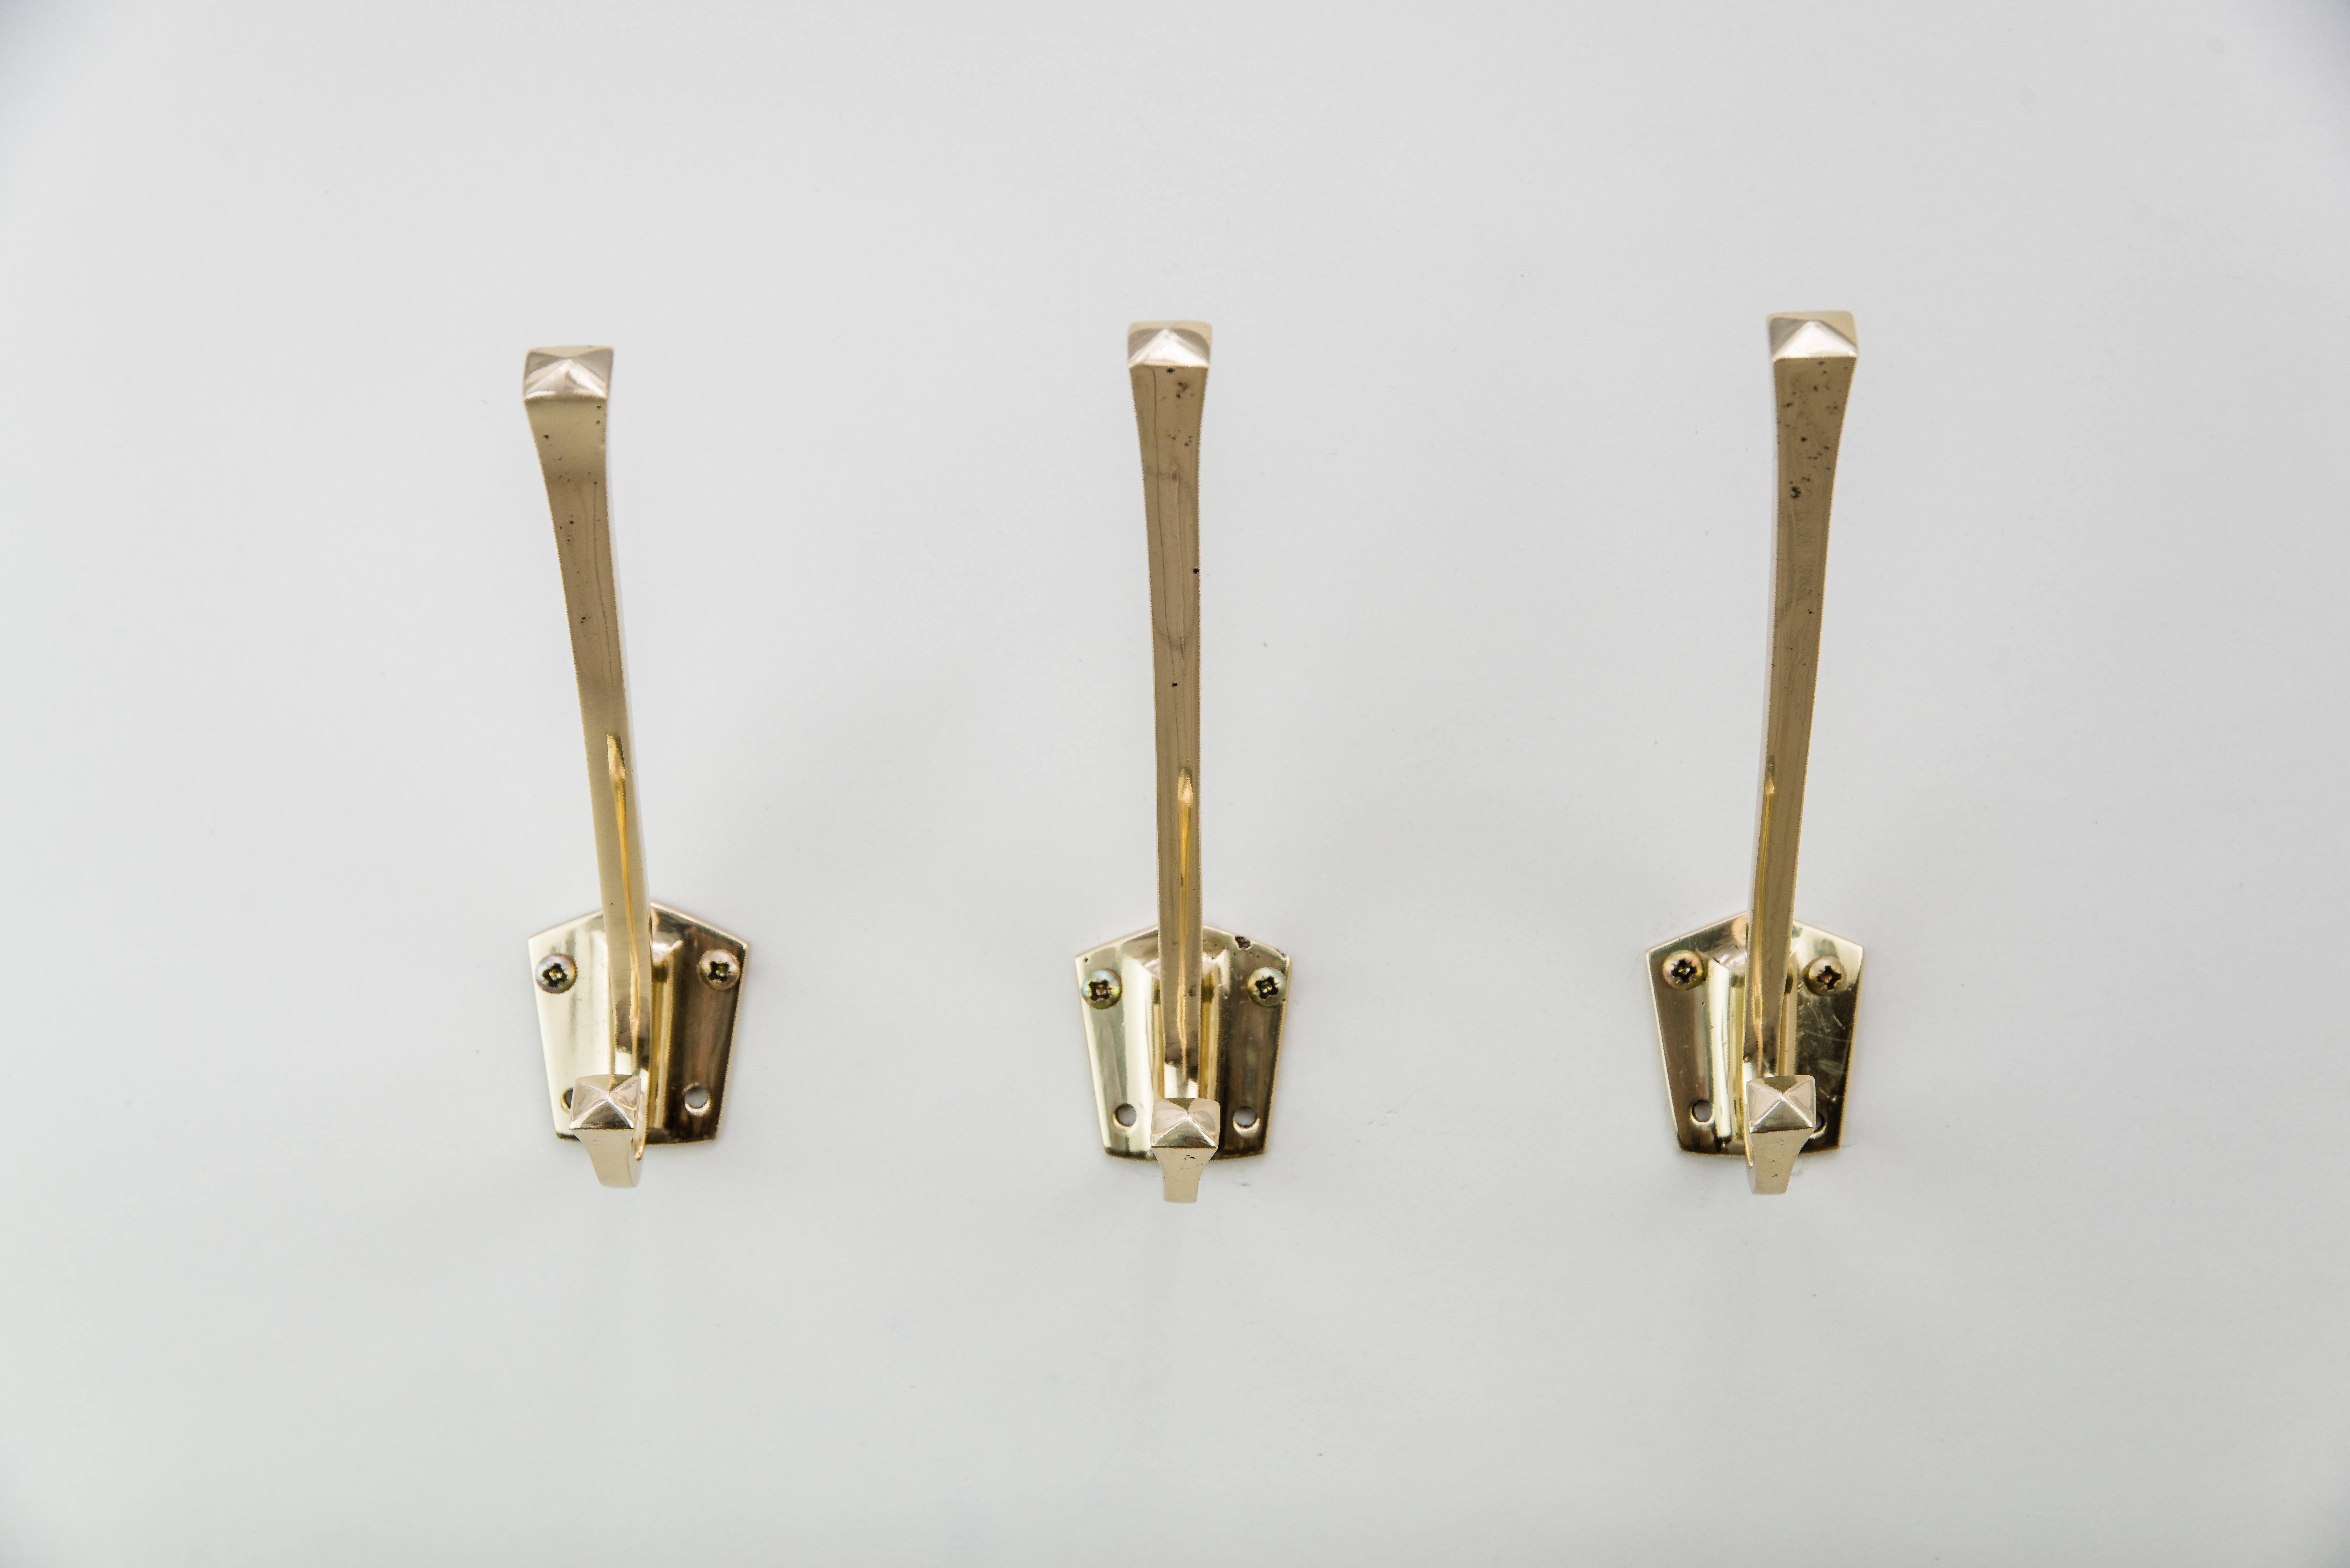 Jugendstil wall hooks, 1910s
Polished and stove enamelled
Price and sell per piece.